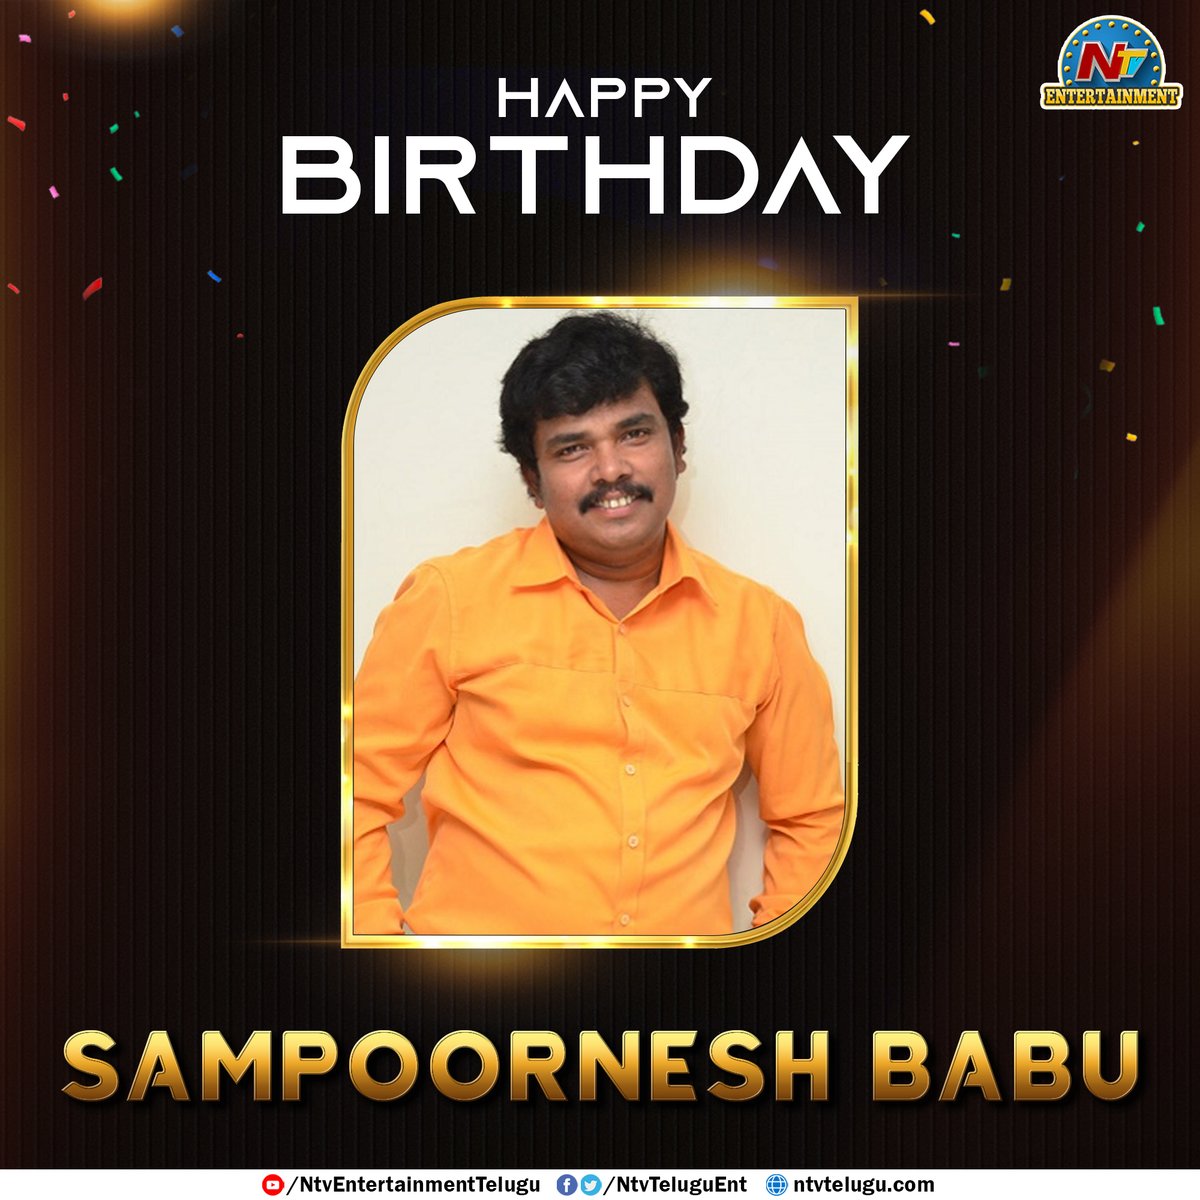 Join us in Wishing @sampoornesh A Very Happy Birthday

#HappyBirthdaySampoorneshBabu #HBDSampoorneshBabu #SampoorneshBabu #NTVENT